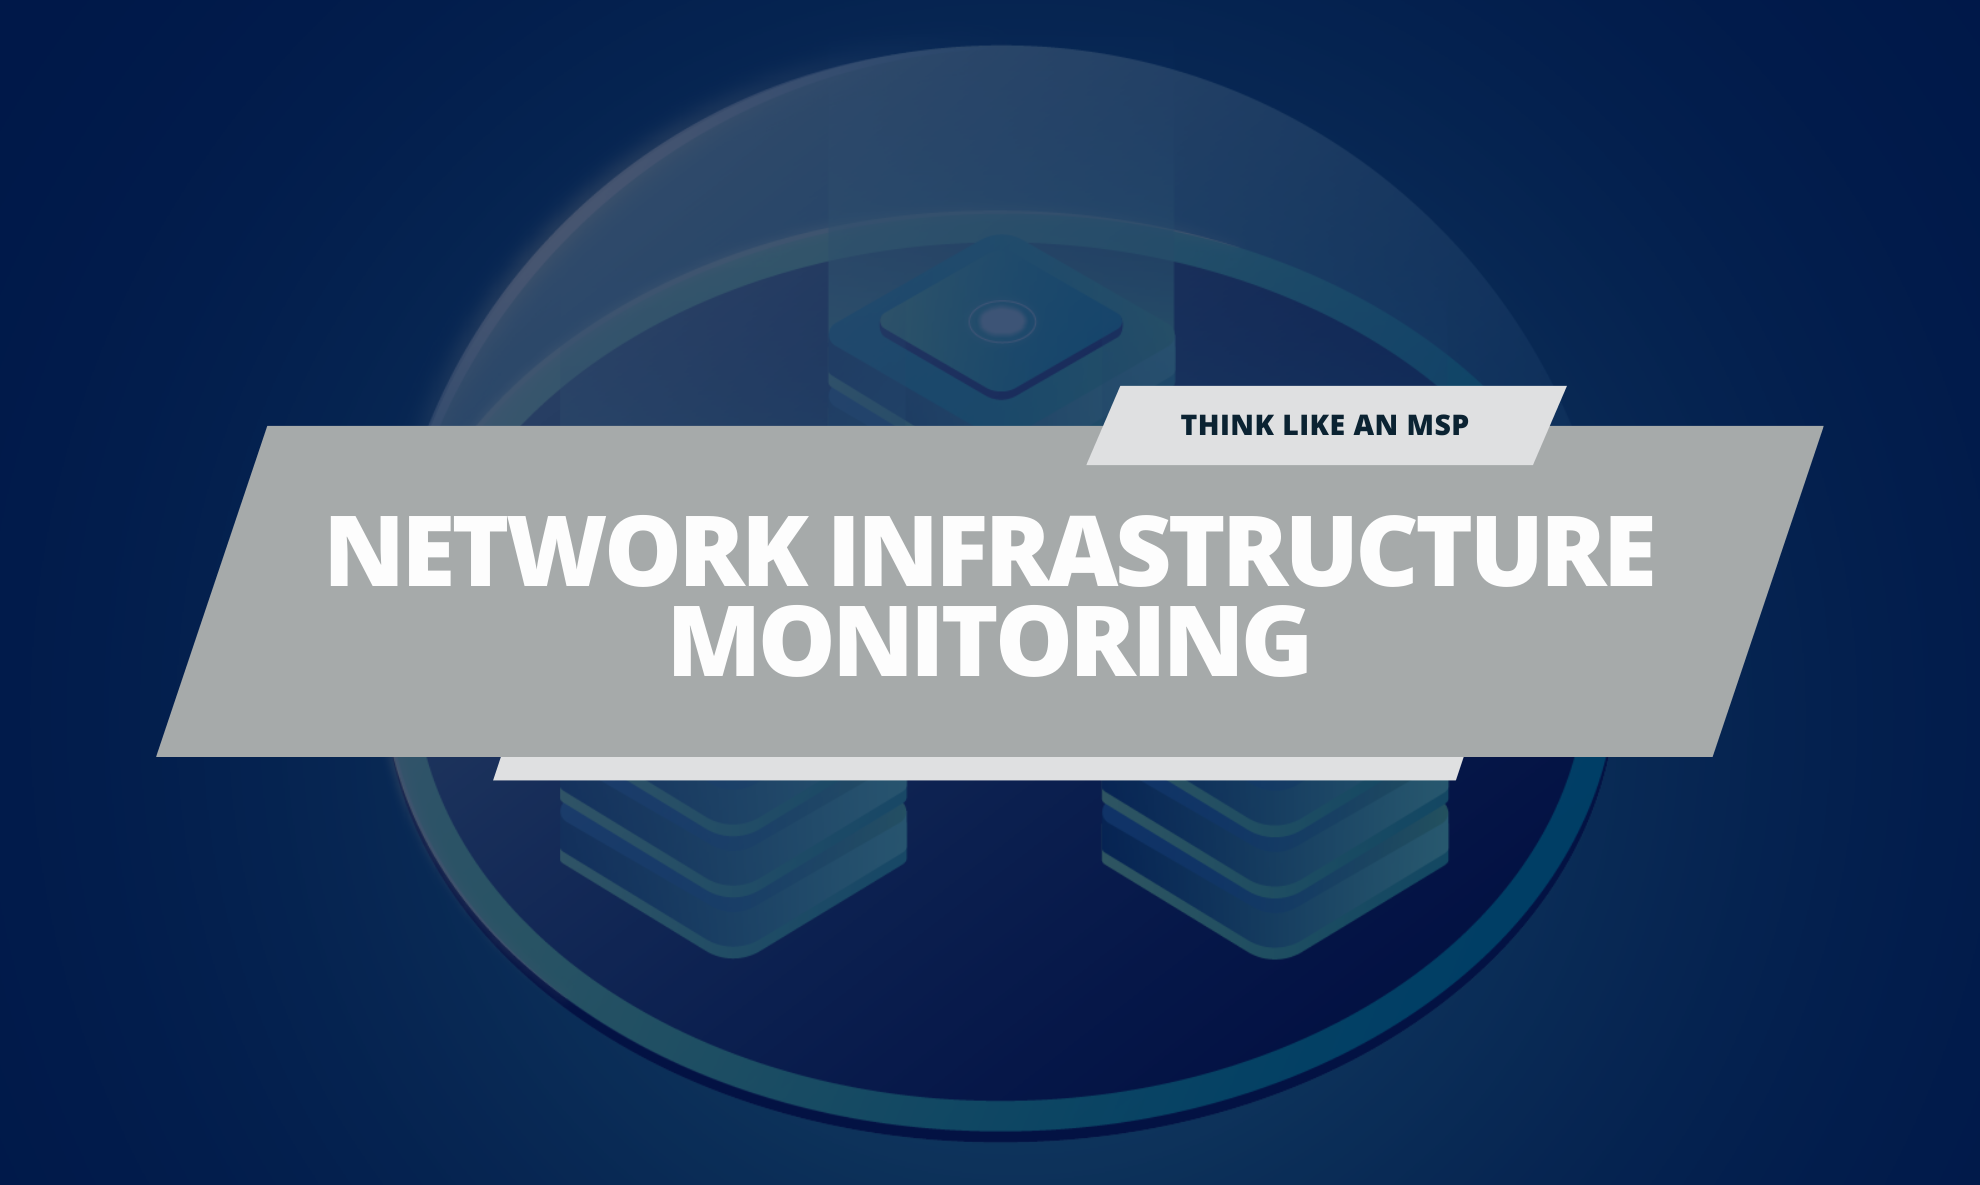 Getting Started With Network Infrastructure Monitoring